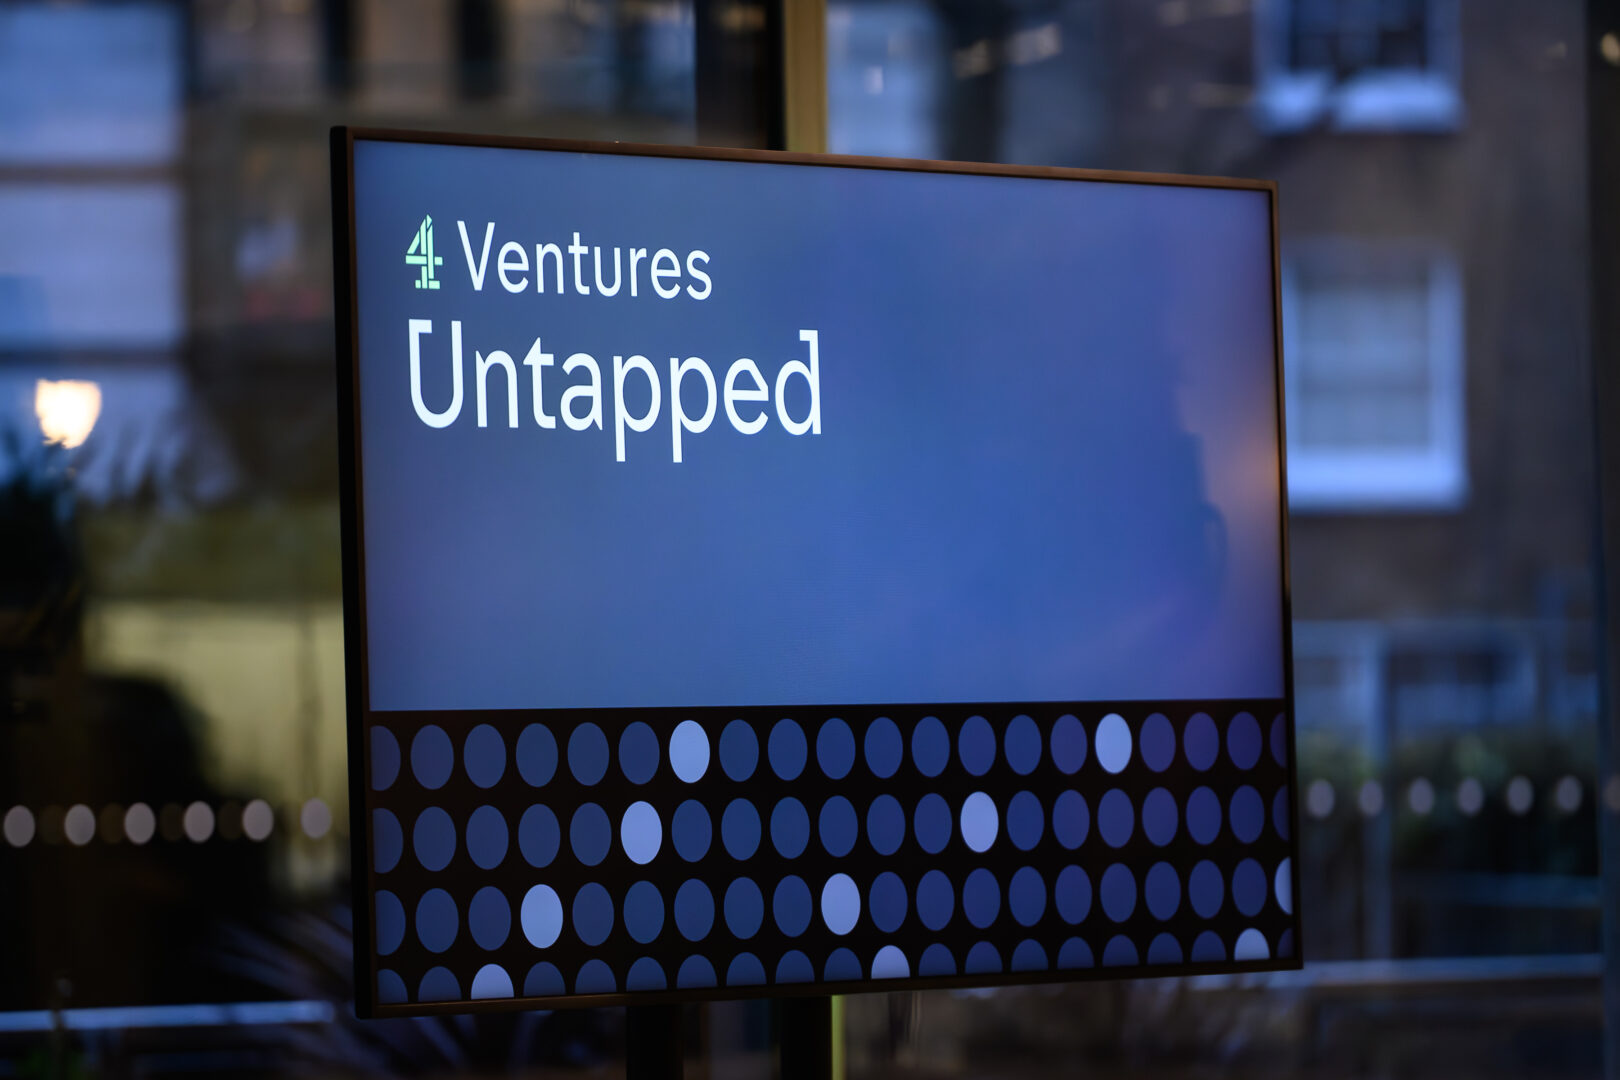 Television screen showcasing 4 Ventures Untapped.